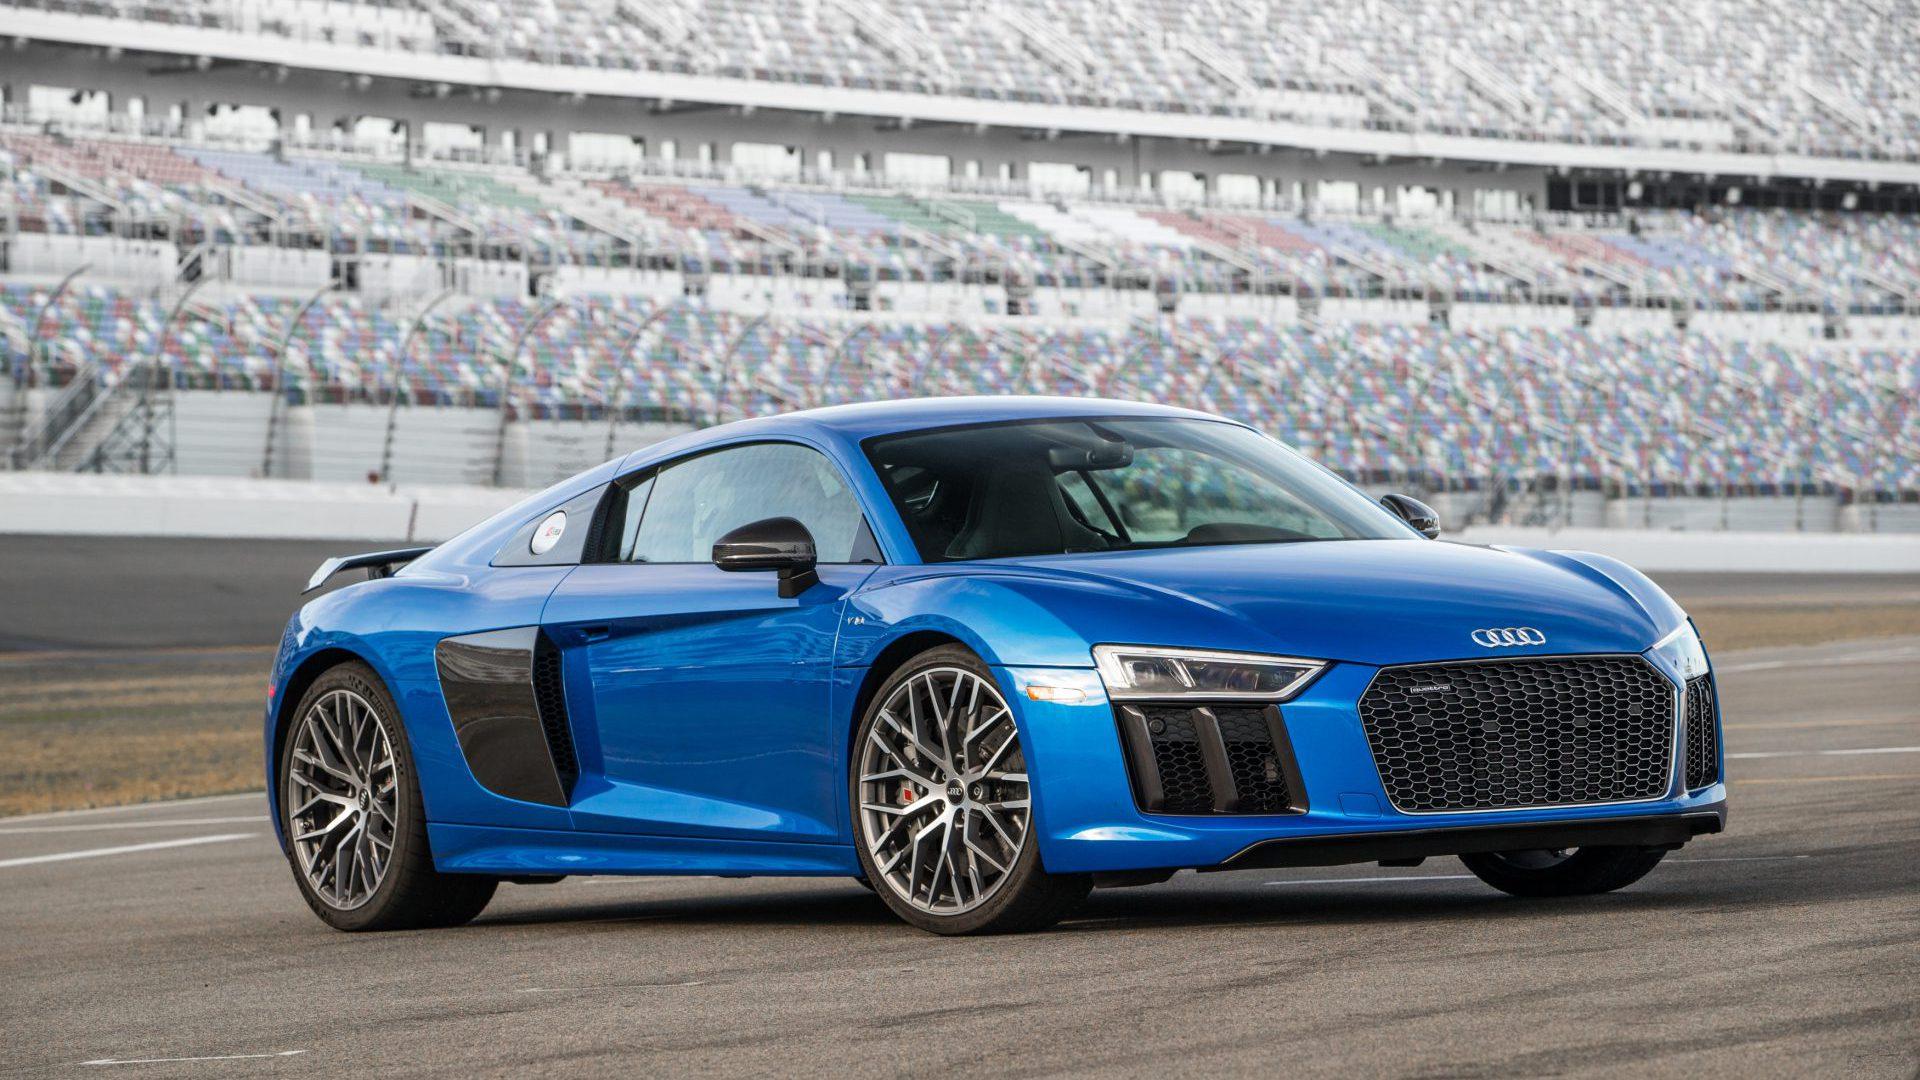 Audi Has No Plans For A Third Generation R8